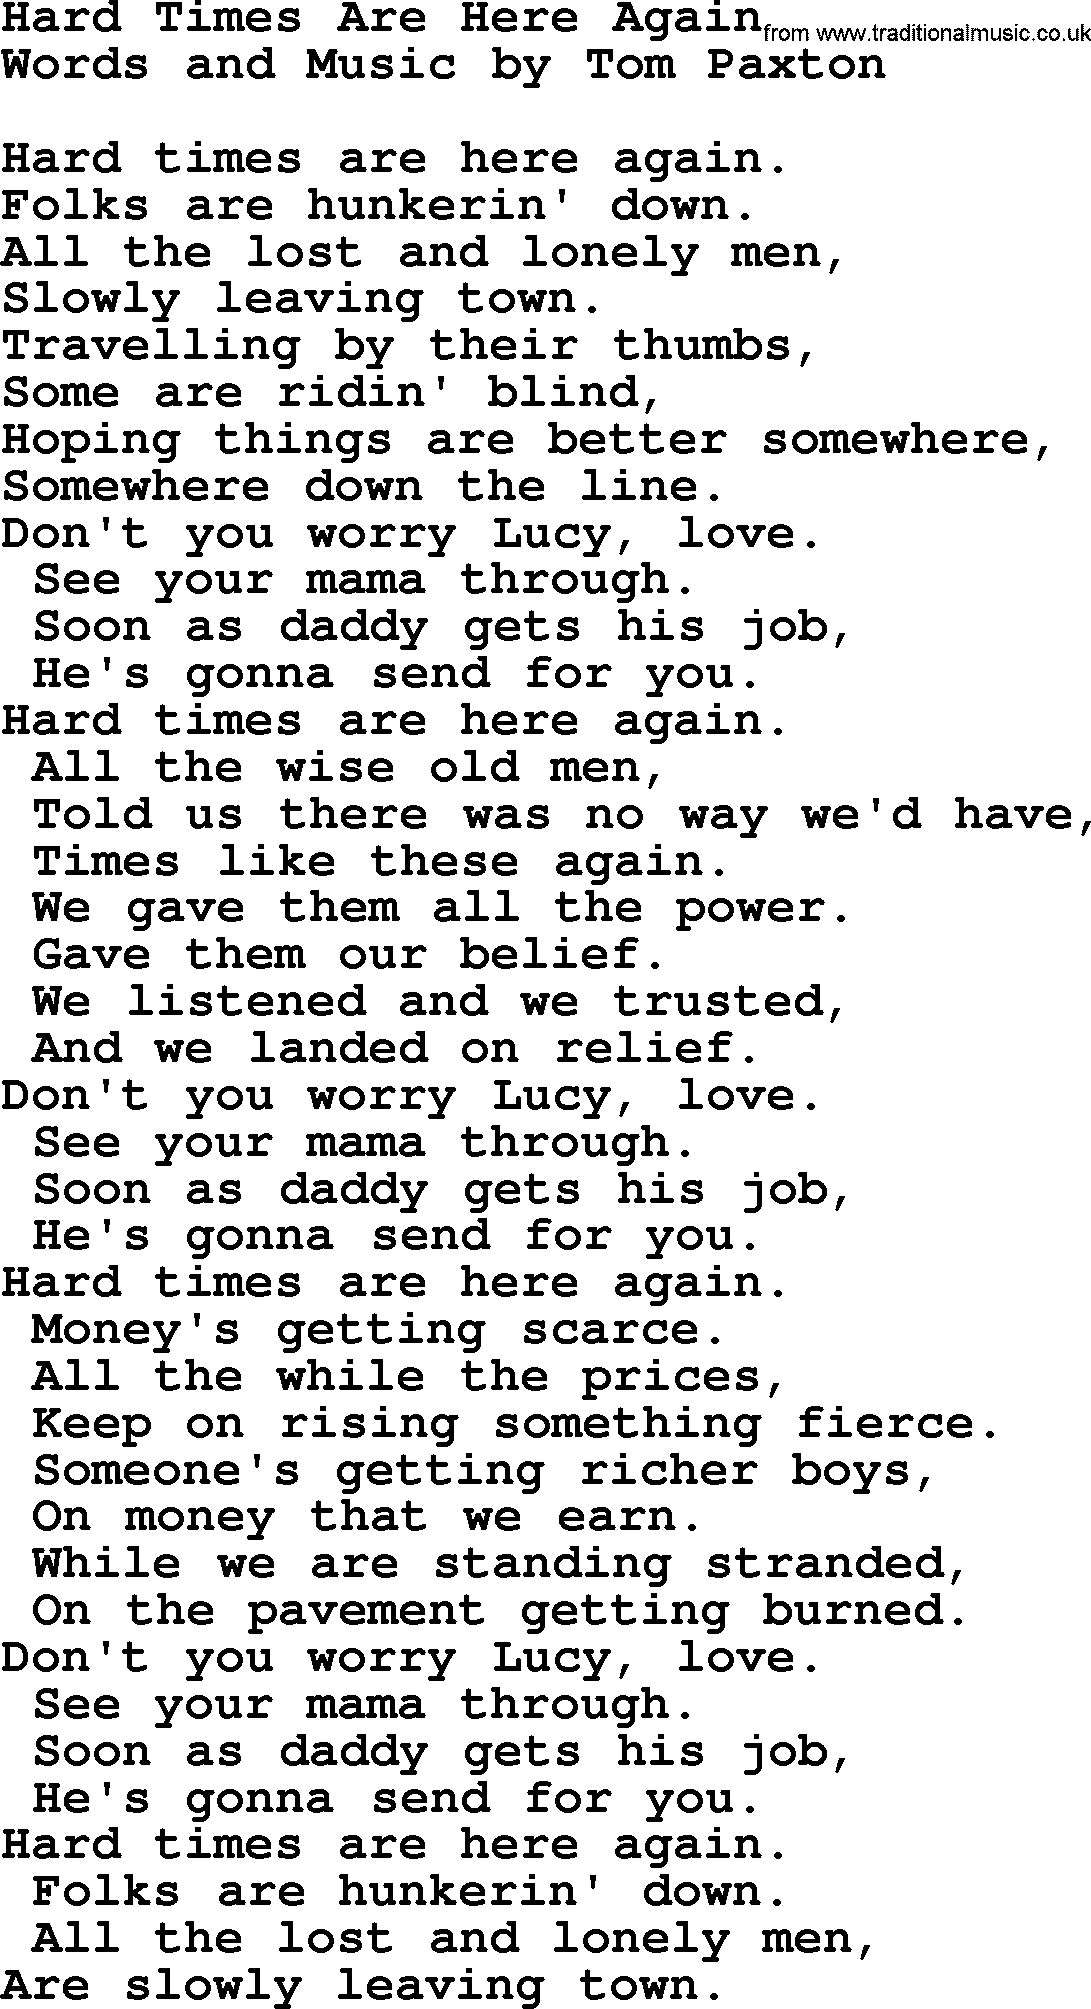 Tom Paxton song: Hard Times Are Here Again, lyrics